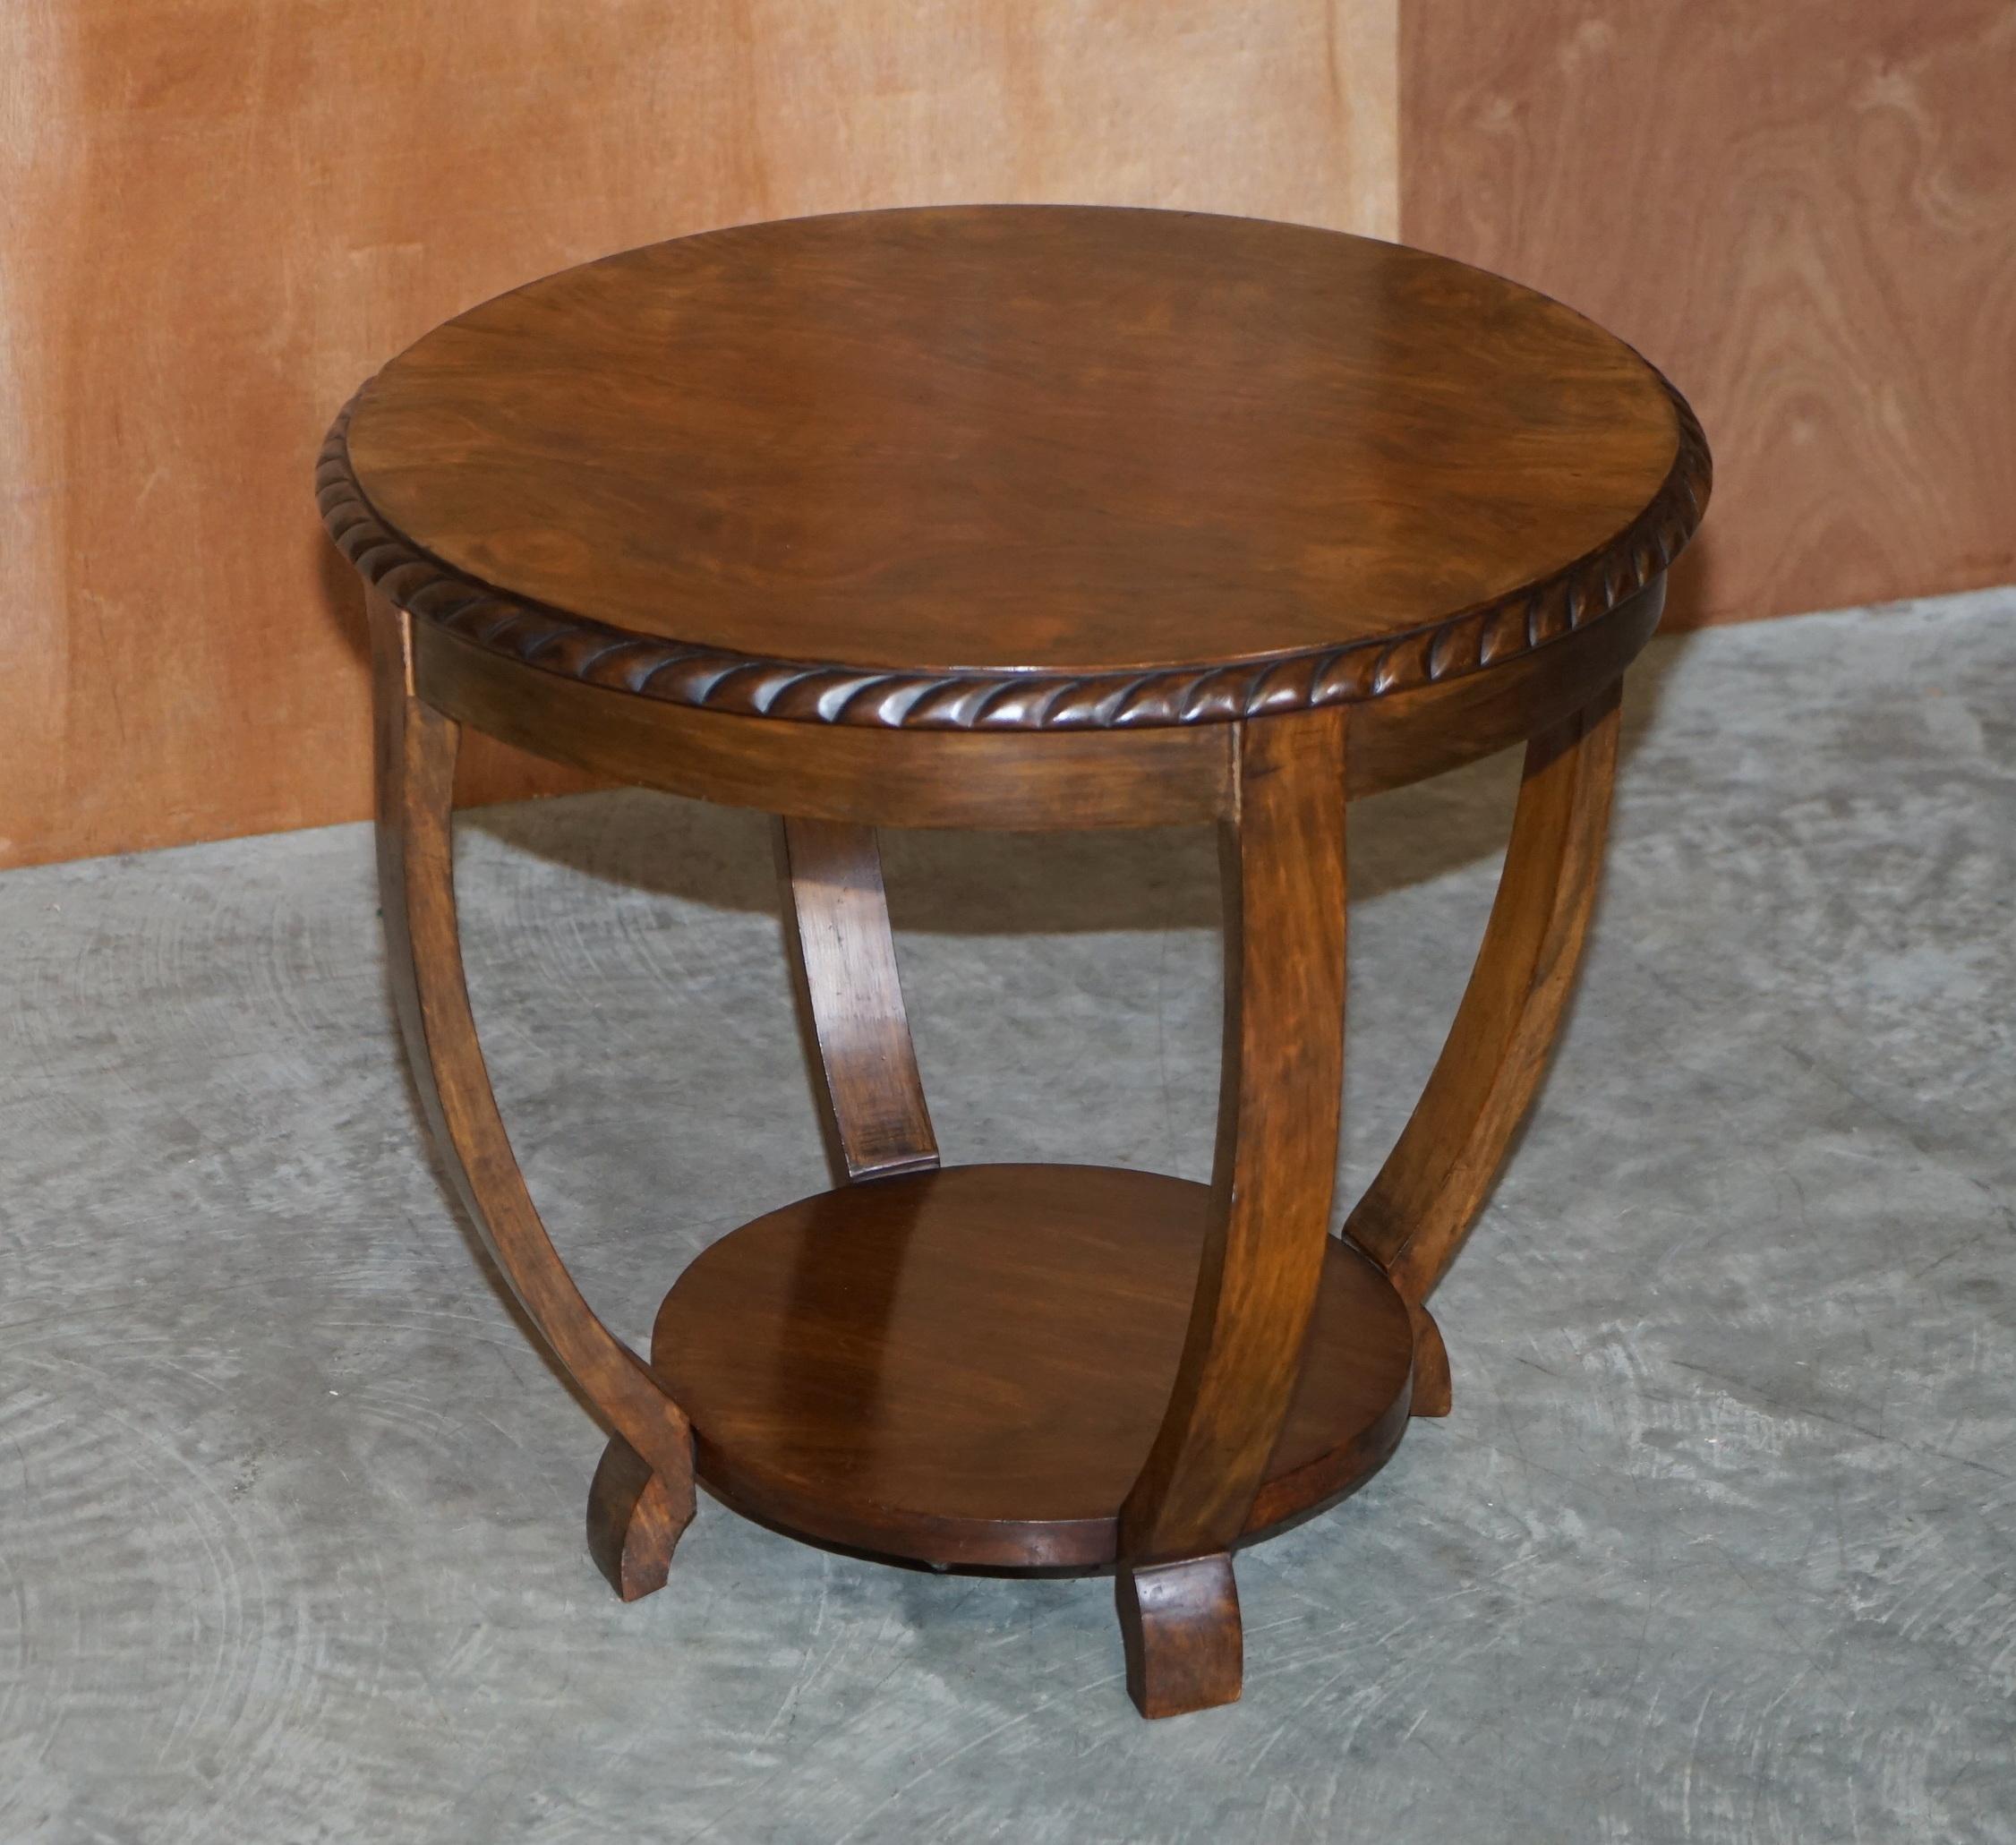 We are delighted to offer for sale this lovely vintage circa 1950’s Burr & Quarter cut Walnut occasional table with nicely sculpted base

A very good looking well made and decorative piece, it sits well in any setting and is very unitarian. It can